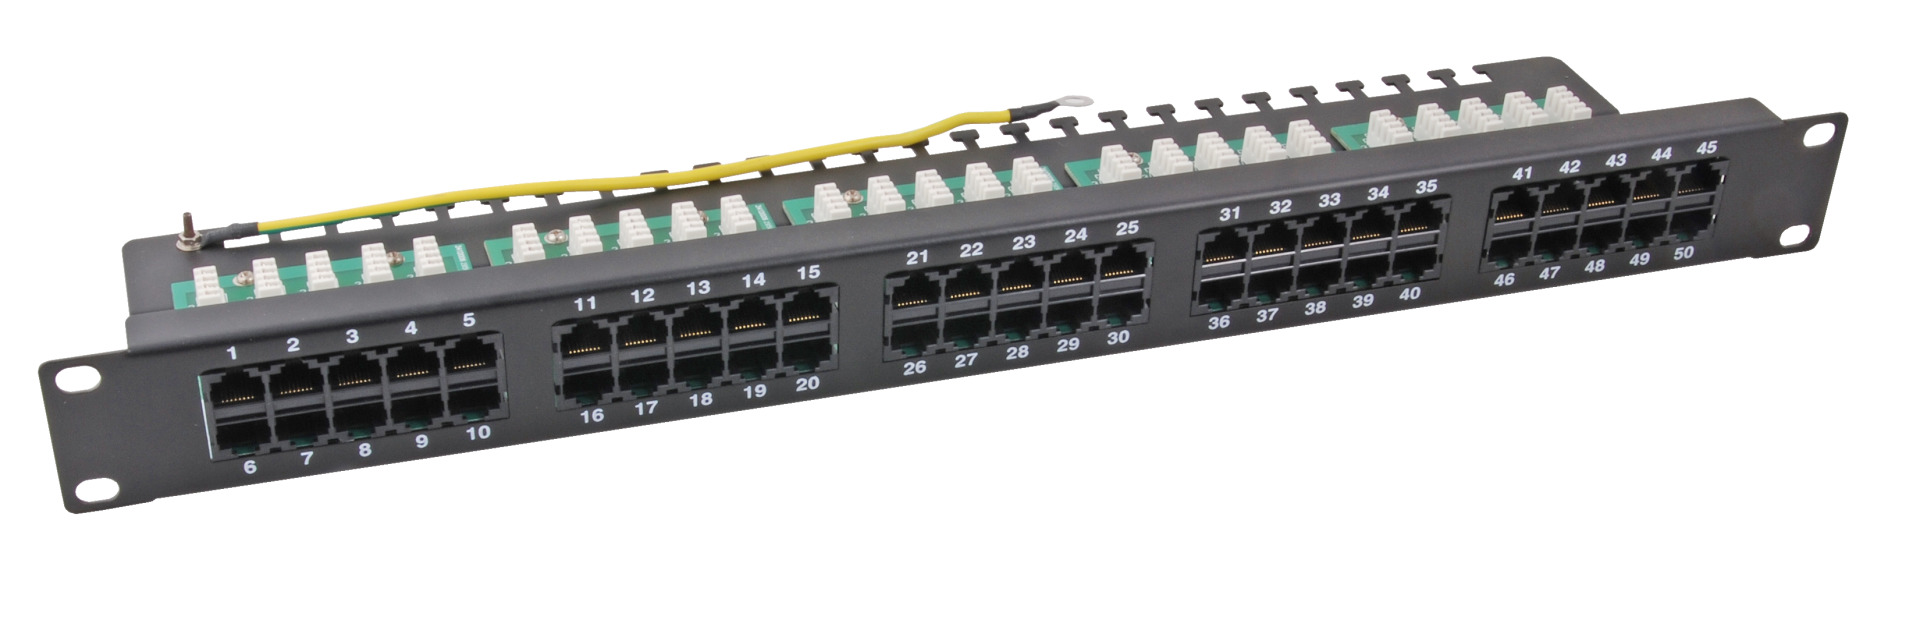 Patch Panel 50 x RJ45 8/4 1HE ISDN, RAL7035, Cat. 3